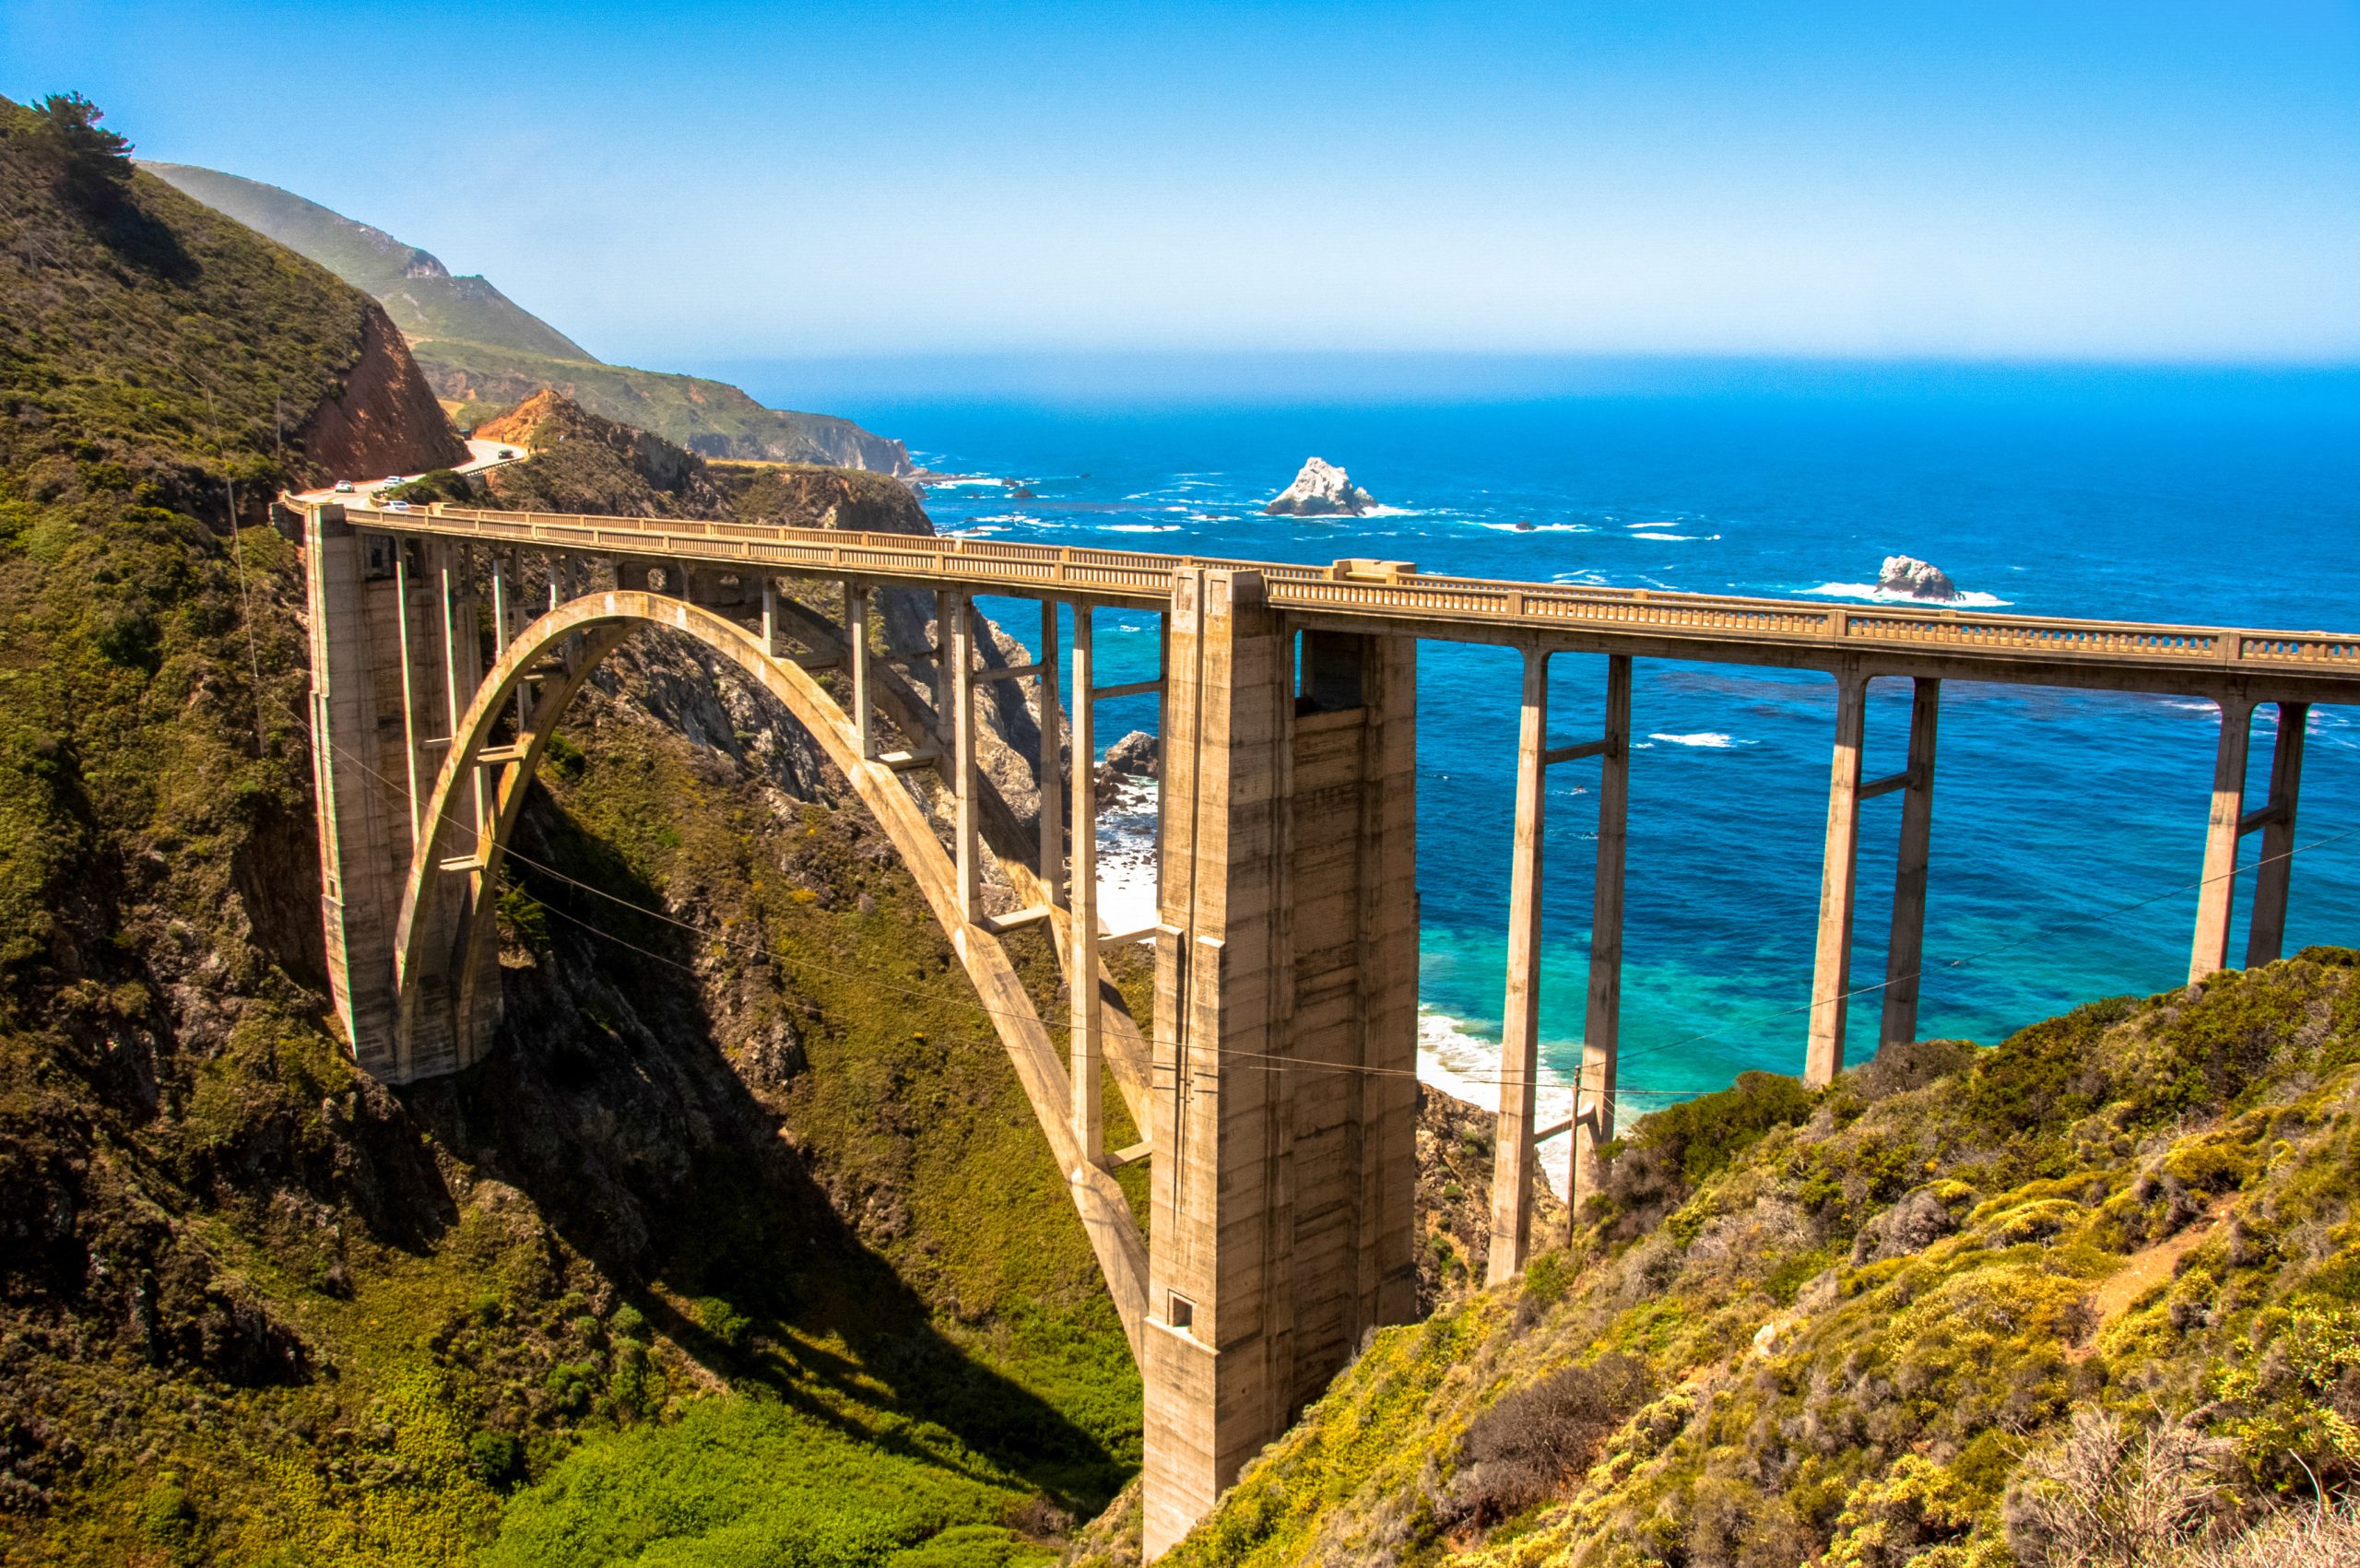 Big Sur on a sunny day with Bixby Bridge in the foreground and bright blue California waters behind it.